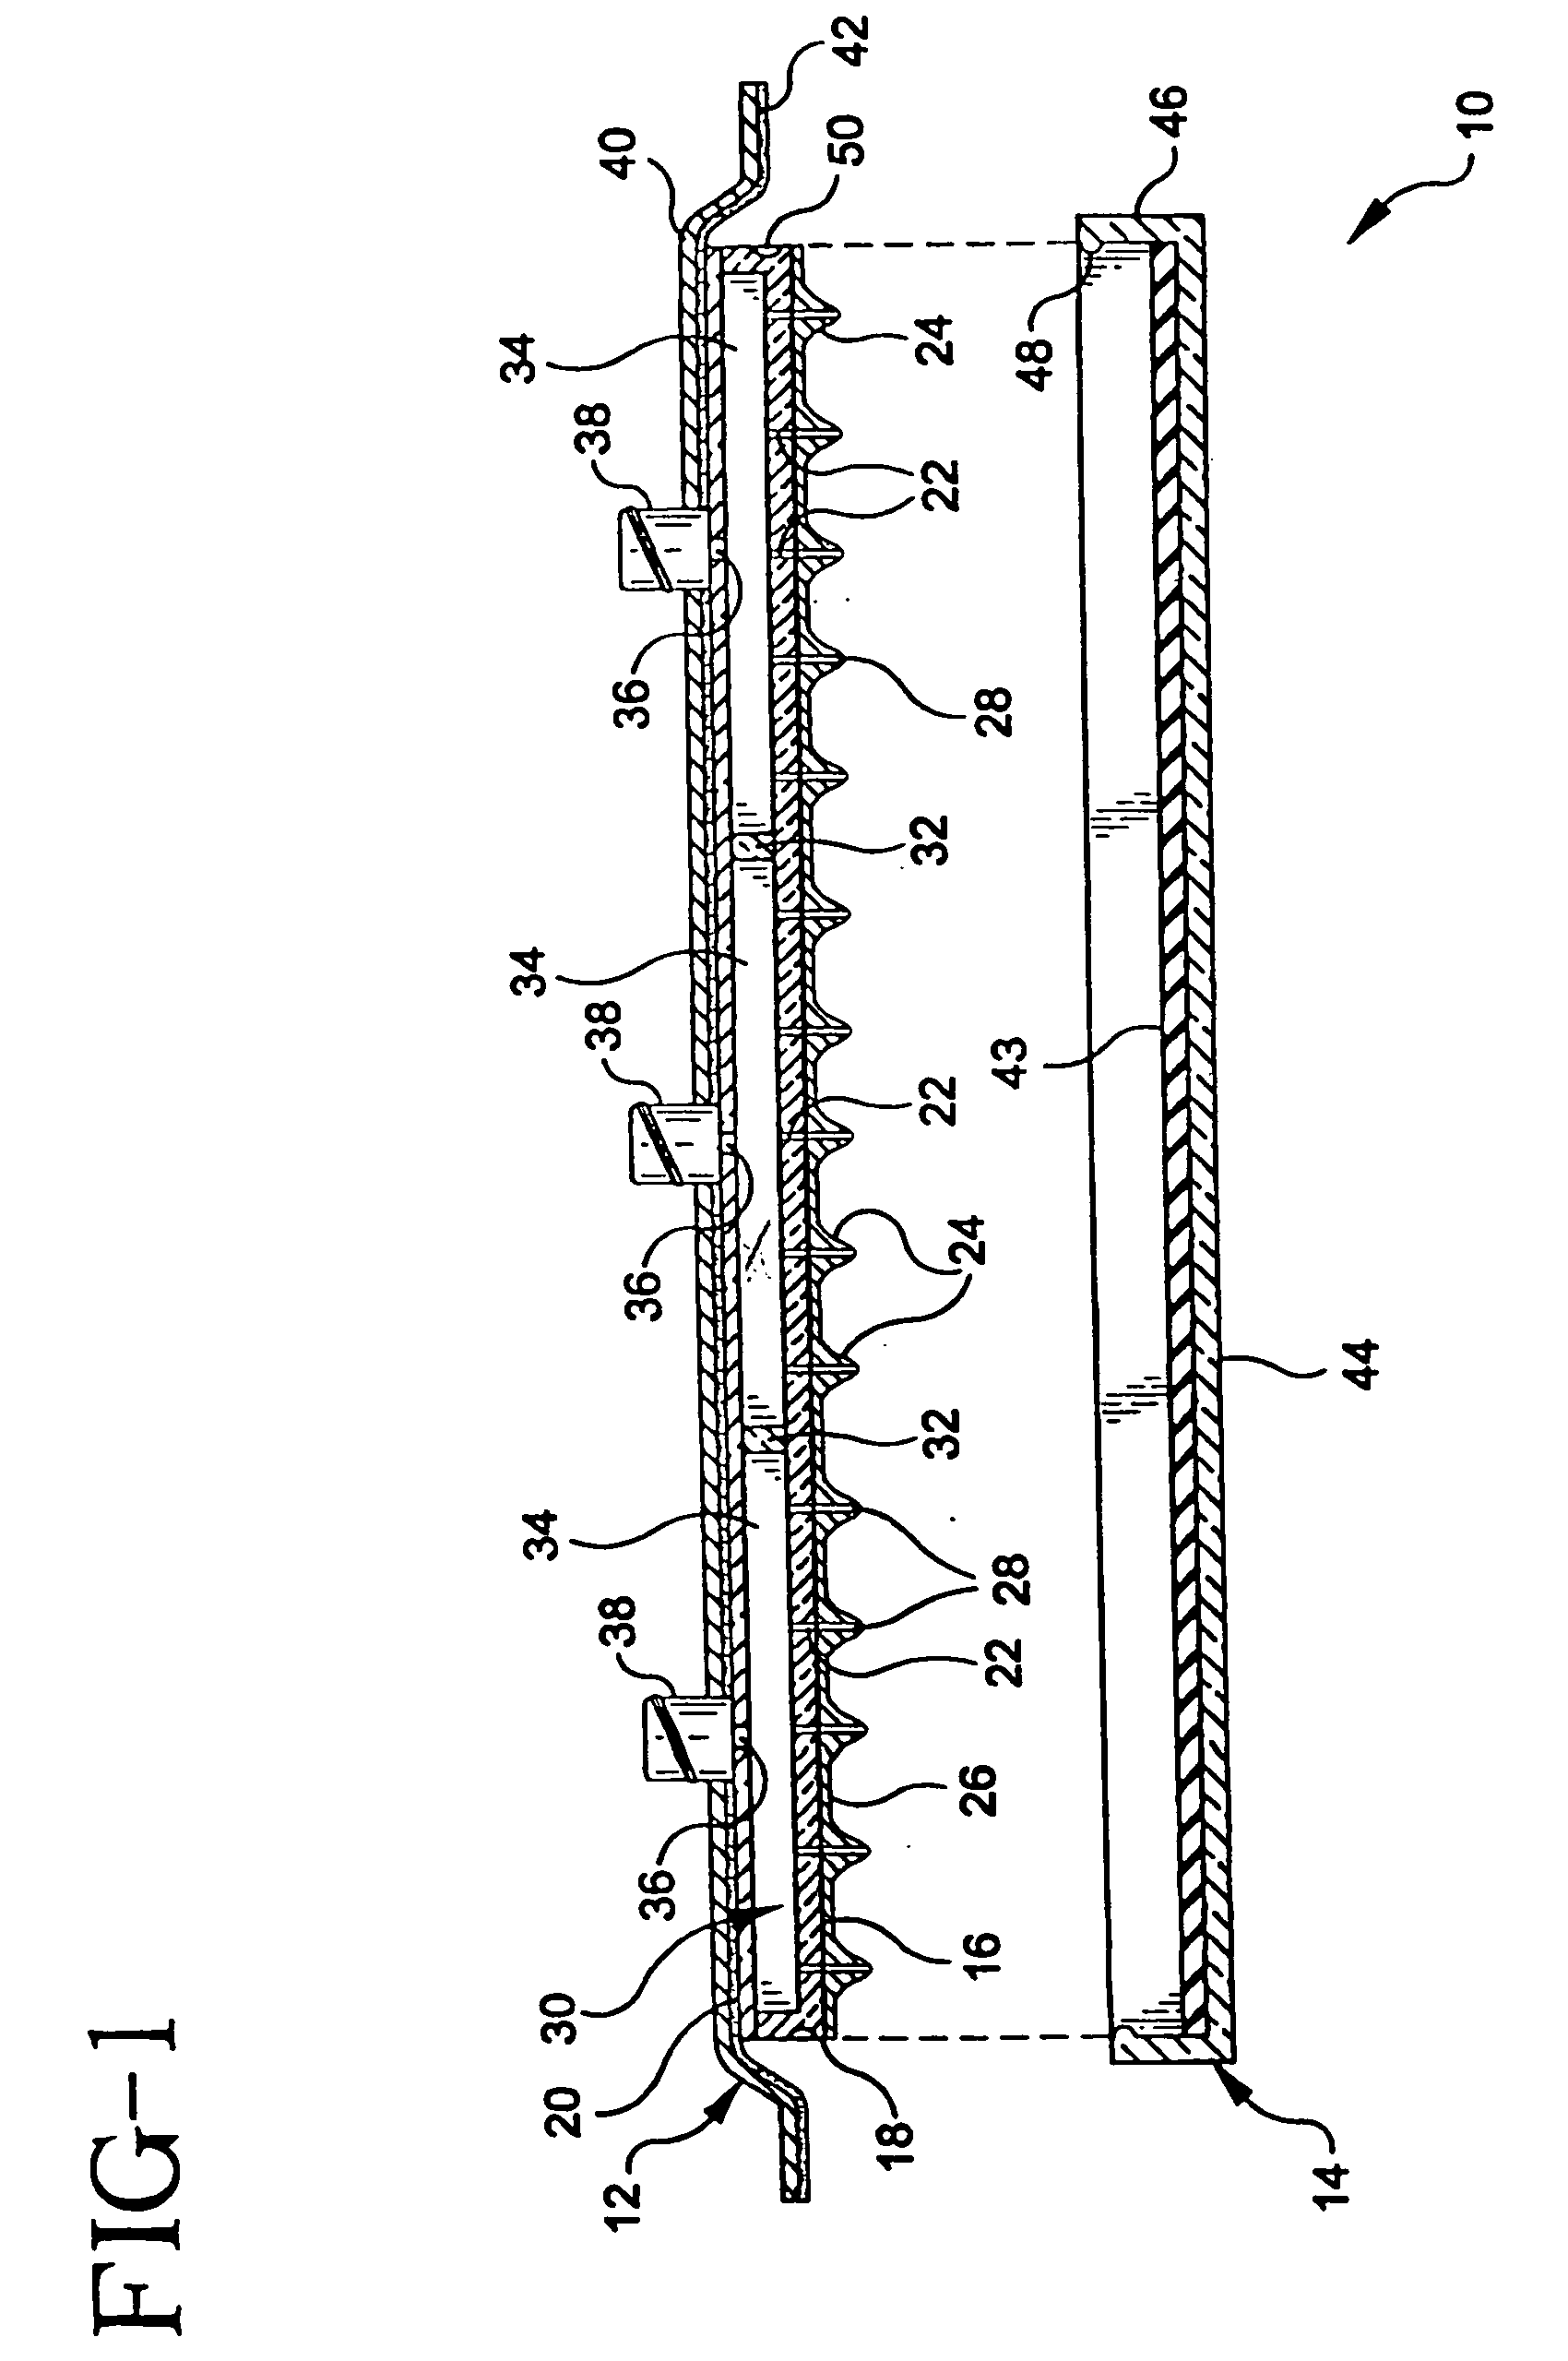 Method and apparatus for the transdermal administration of a substance